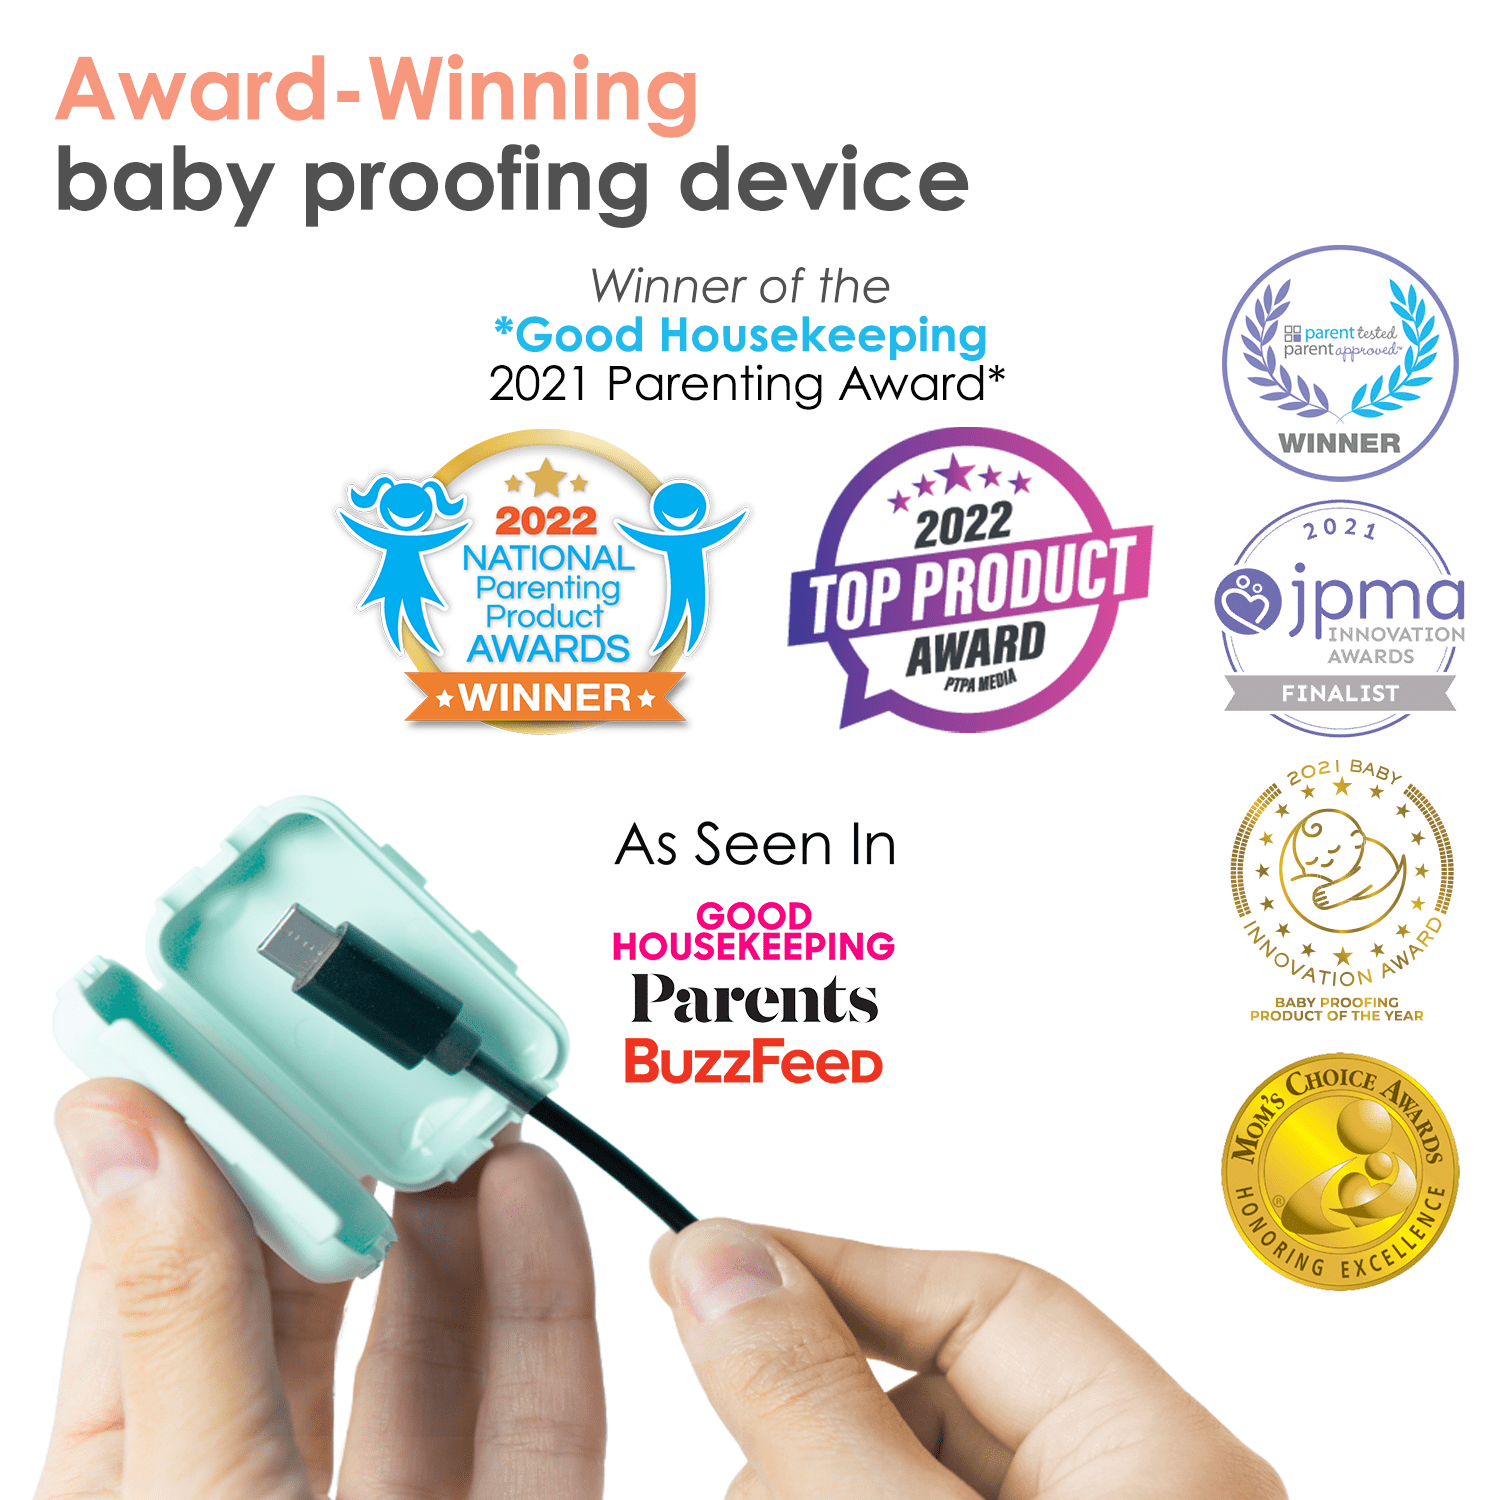 Watch Your Mouth Baby Proof Cord Cover | Award-Winning USB Charger Cover  for Baby Proofing Cords | BPA & Phthalate-Free Charger Cover Protector 